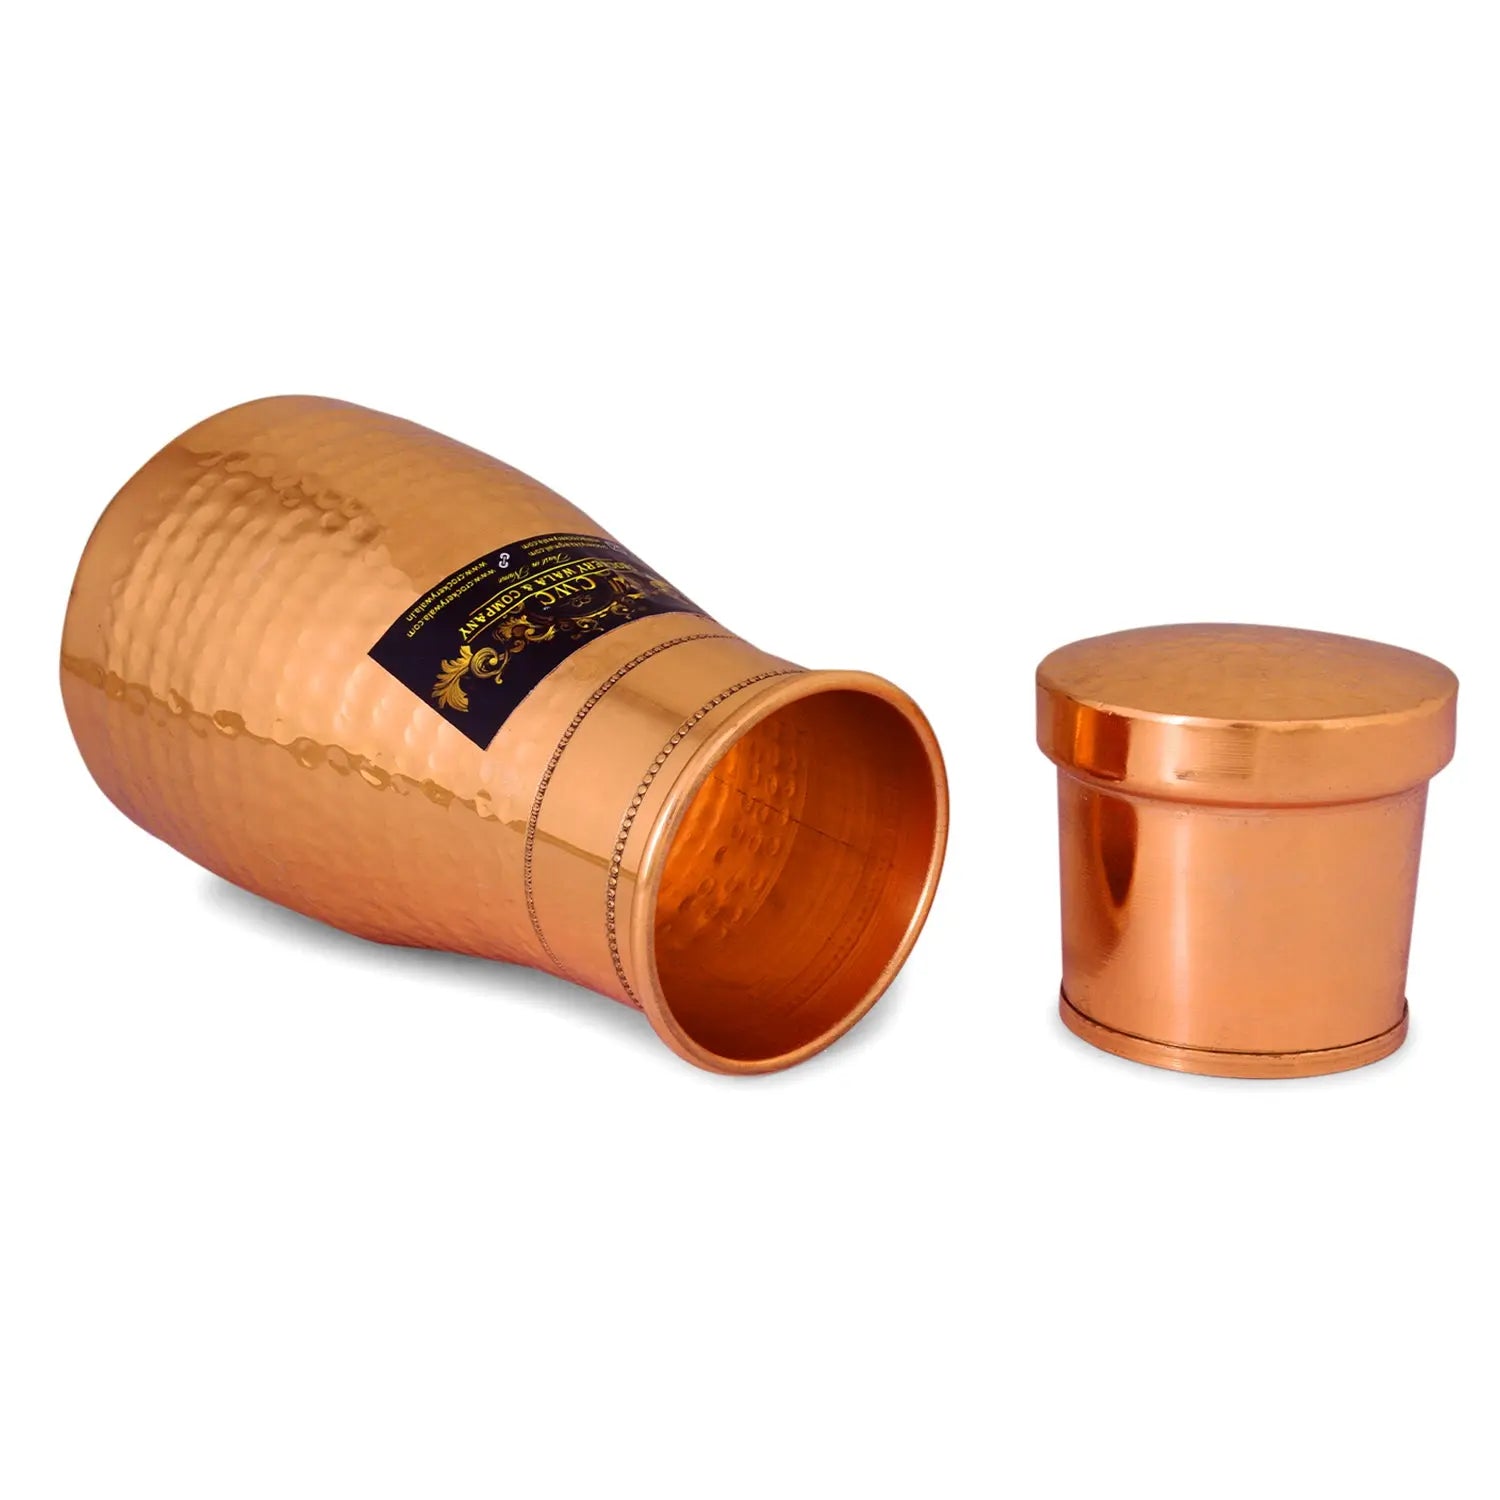 Crockery Wala And Company Bed Side Pure Copper Bottle/Jar 750 Ml - Crockery Wala And Company